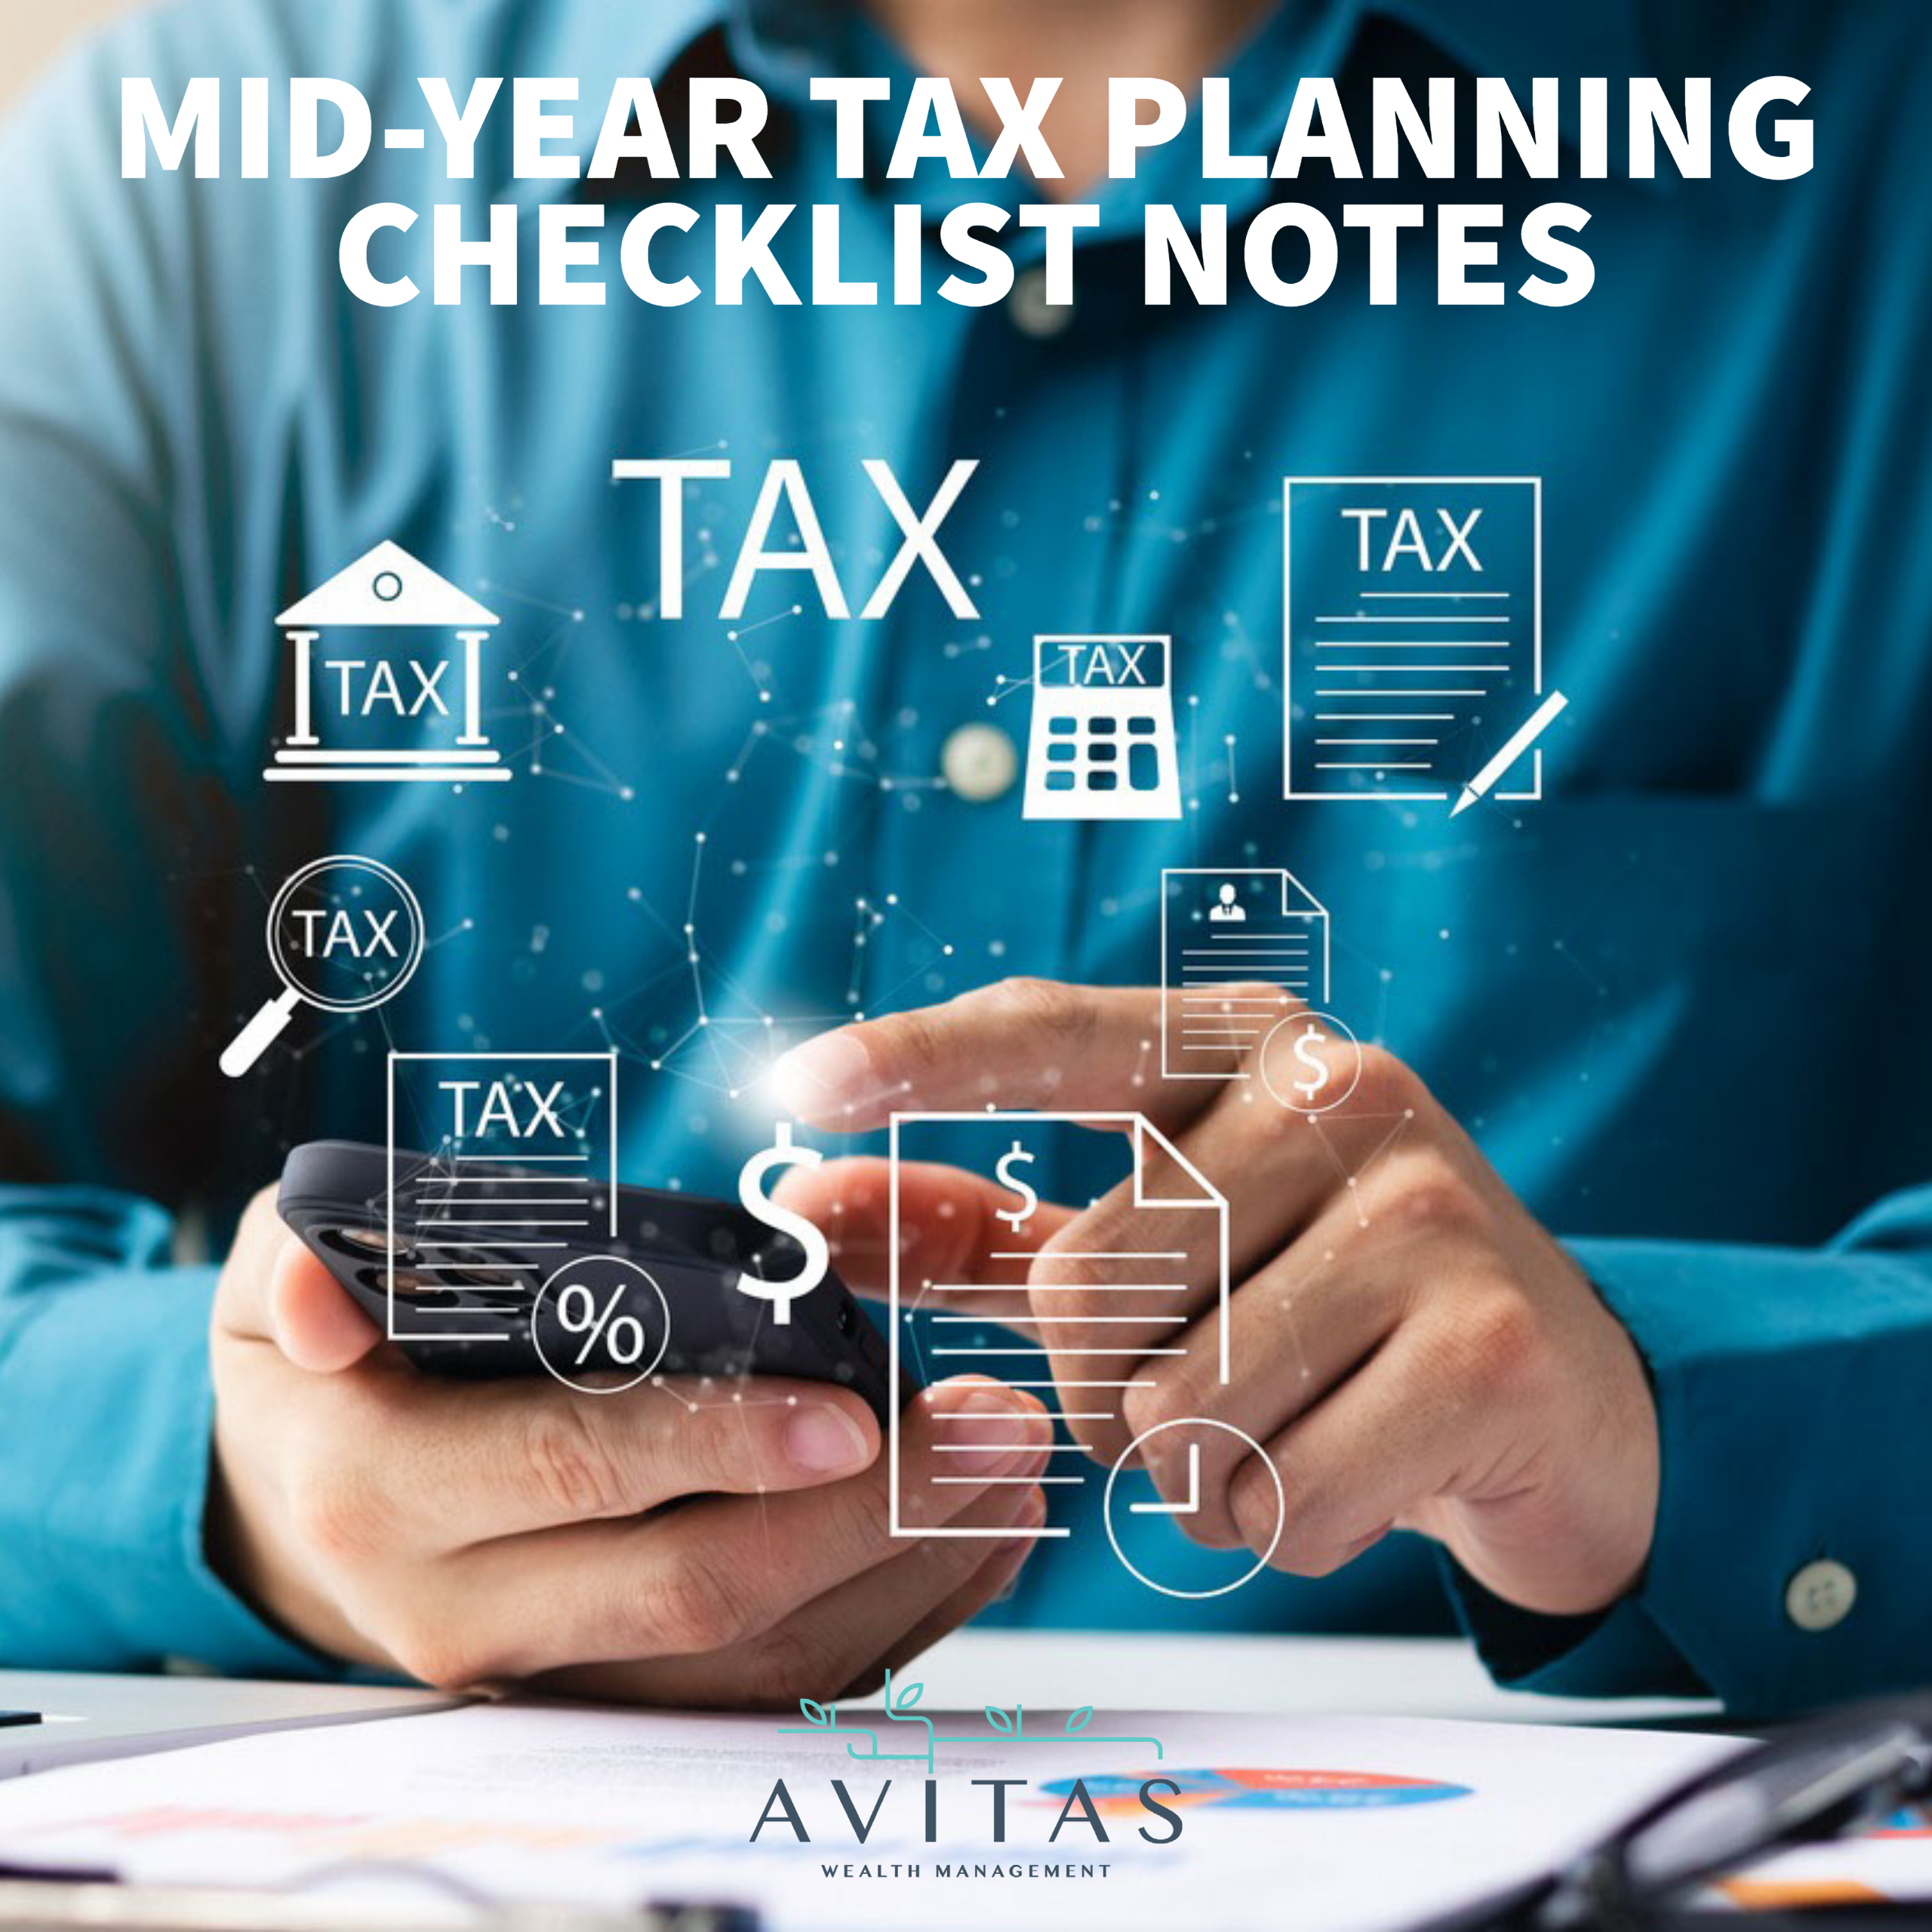 Mid-Year Tax Planning Checklist Notes